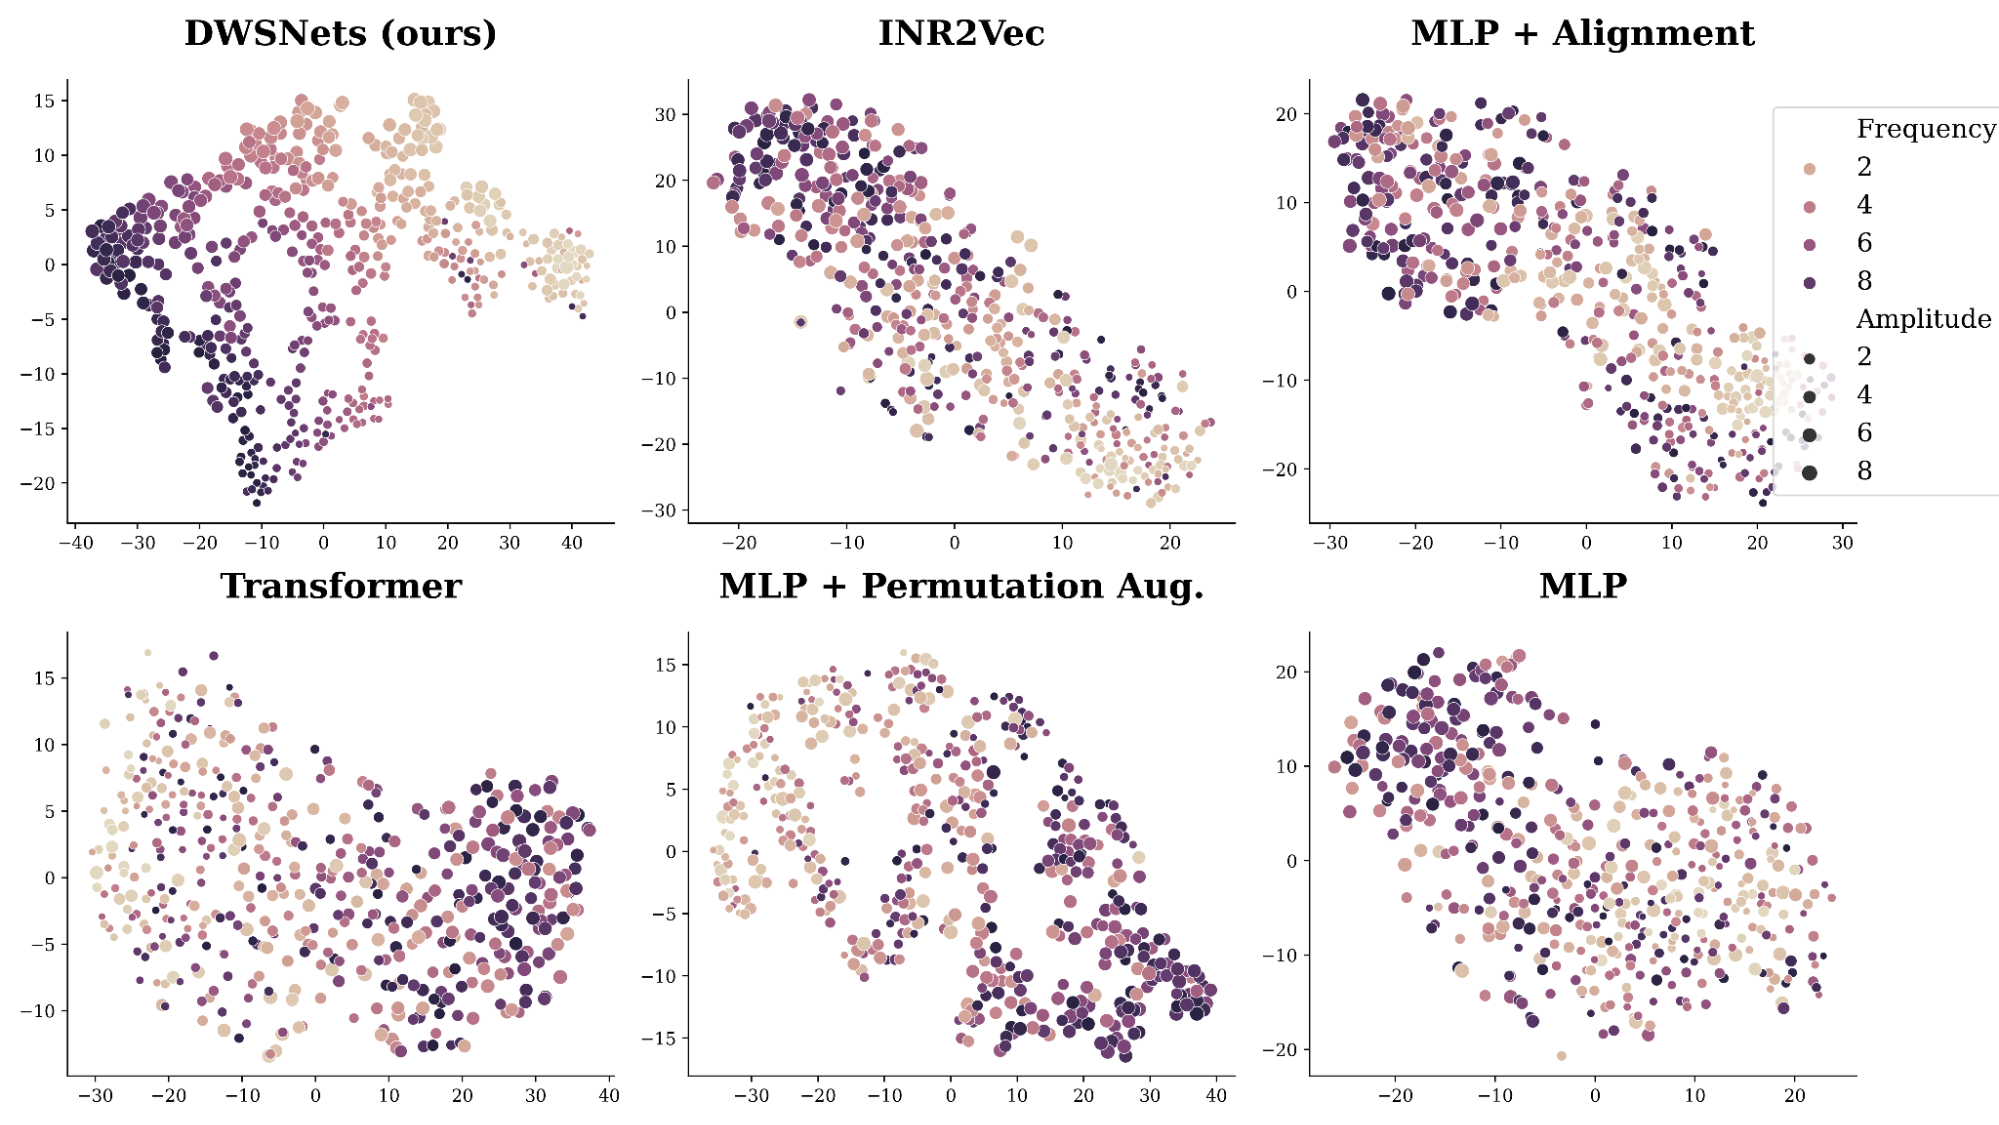 The figure shows 2D TSNE embeddings of input MLPs obtained by training using self-supervision. Each point corresponds to an input MLP that represents a 1D sine wave g(x)=a\sin(bx)  with a different amplitude a and frequency b. DWSnets successfully reconstruct the amplitude-frequency space while other methods struggle.